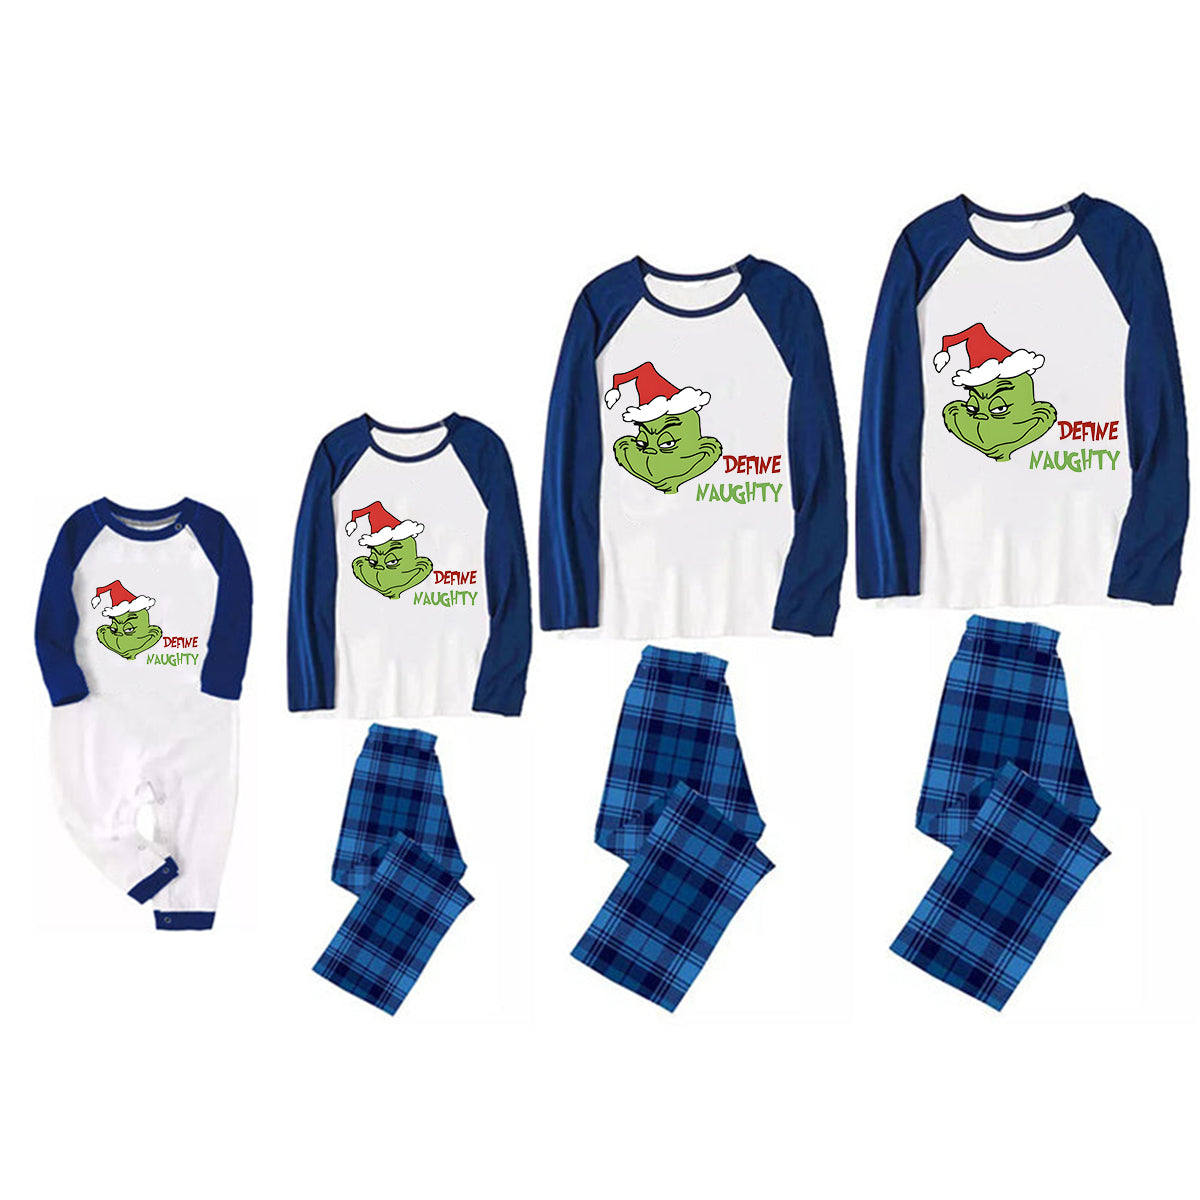 Christmas 'Define Naughty' Letter Print Patterned Casual Long Sleeve Sweatshirts Blue Sleeve Contrast Tops and Blue Plaid Pants Family Matching Pajamas Sets With Dog Bandan